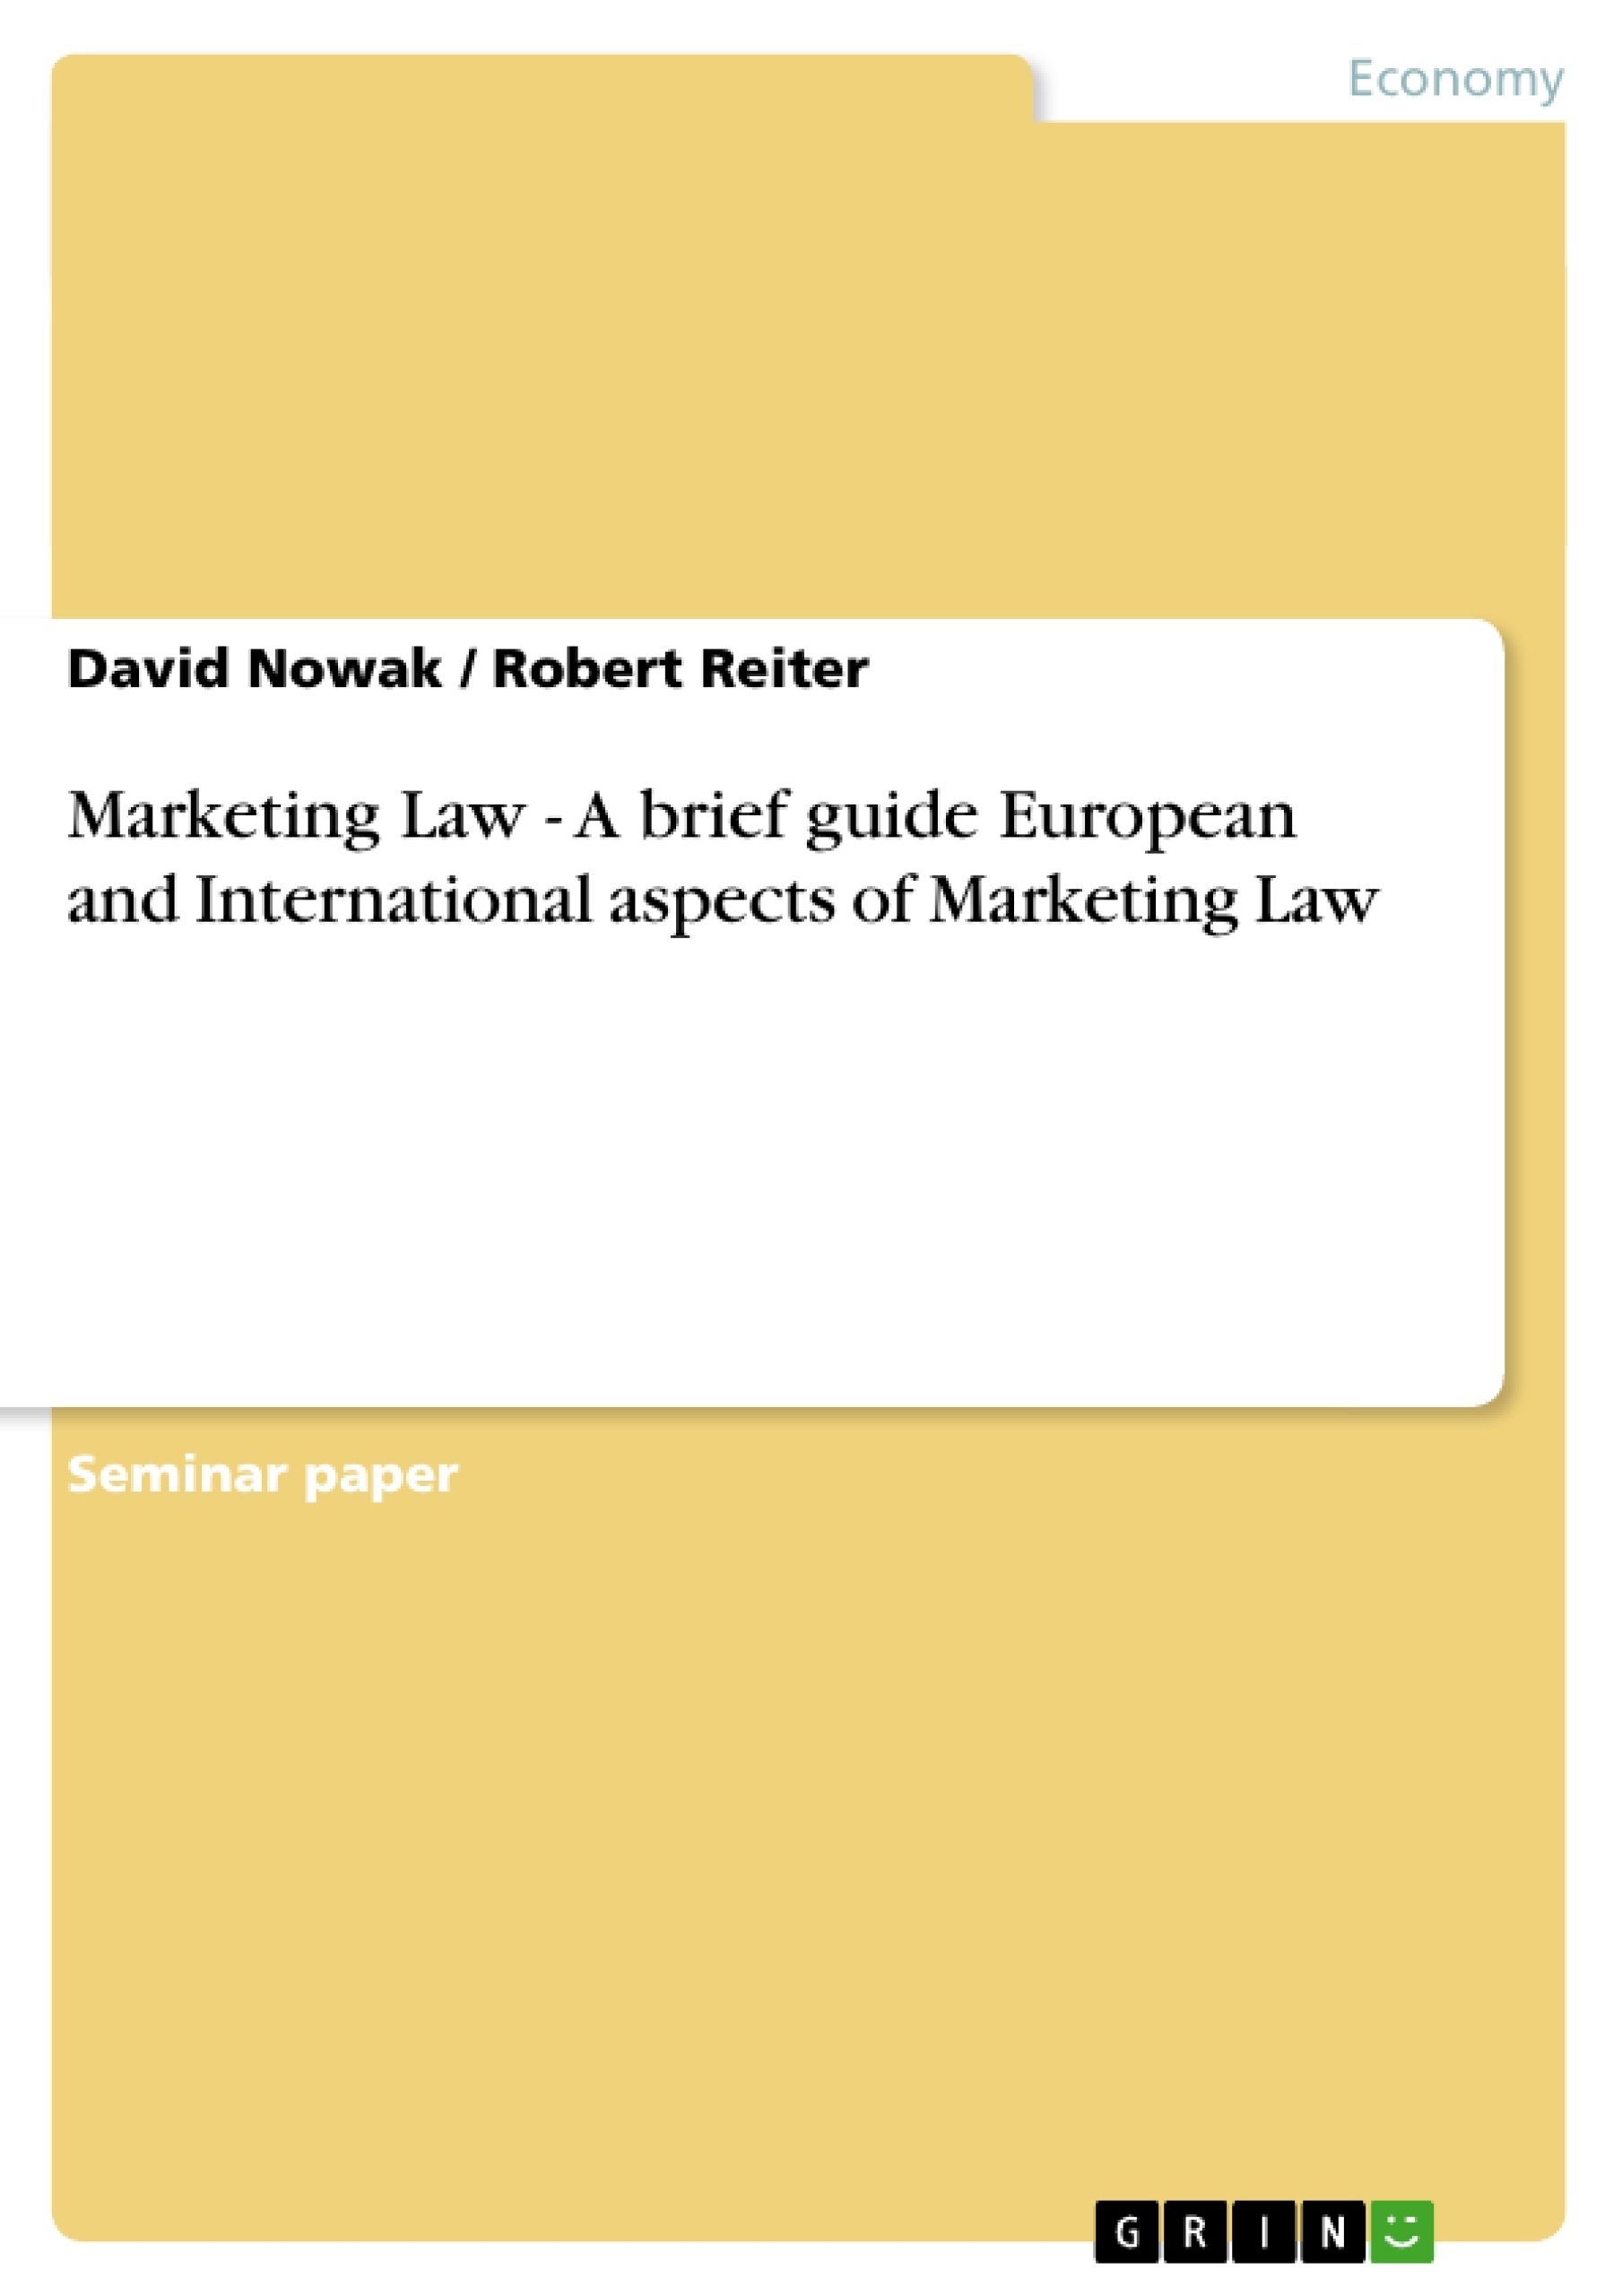 Title: Marketing Law - A brief guide European and International aspects of Marketing Law